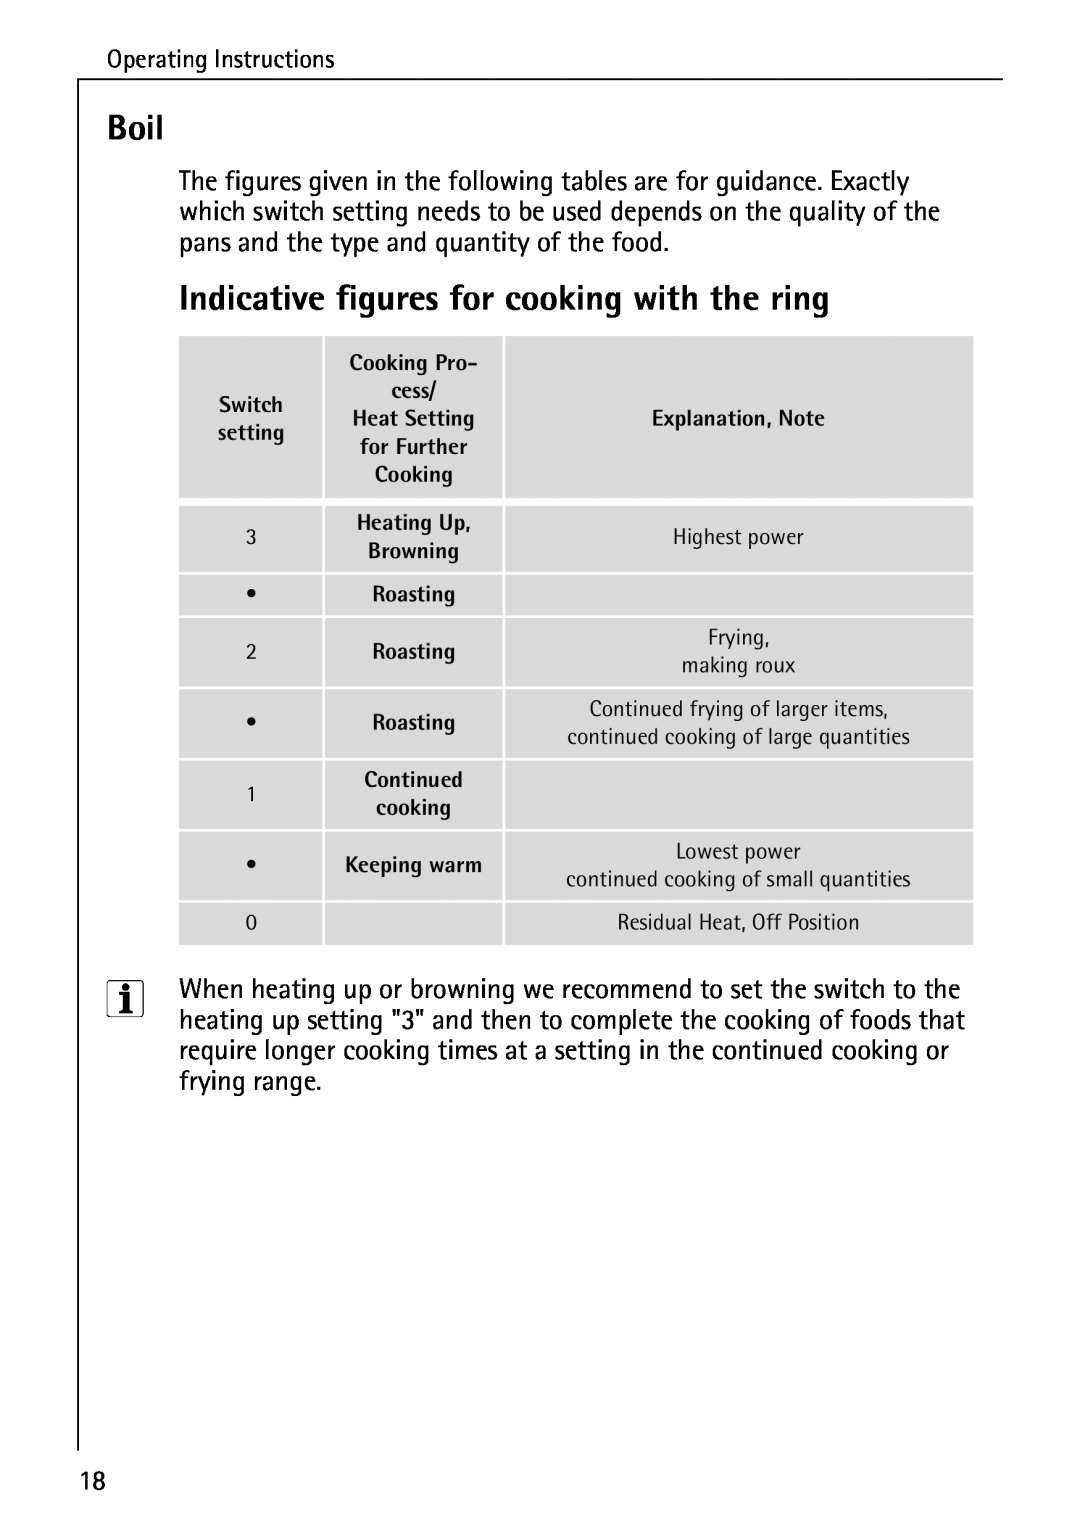 AEG 2003 F operating instructions Boil, Indicative figures for cooking with the ring 